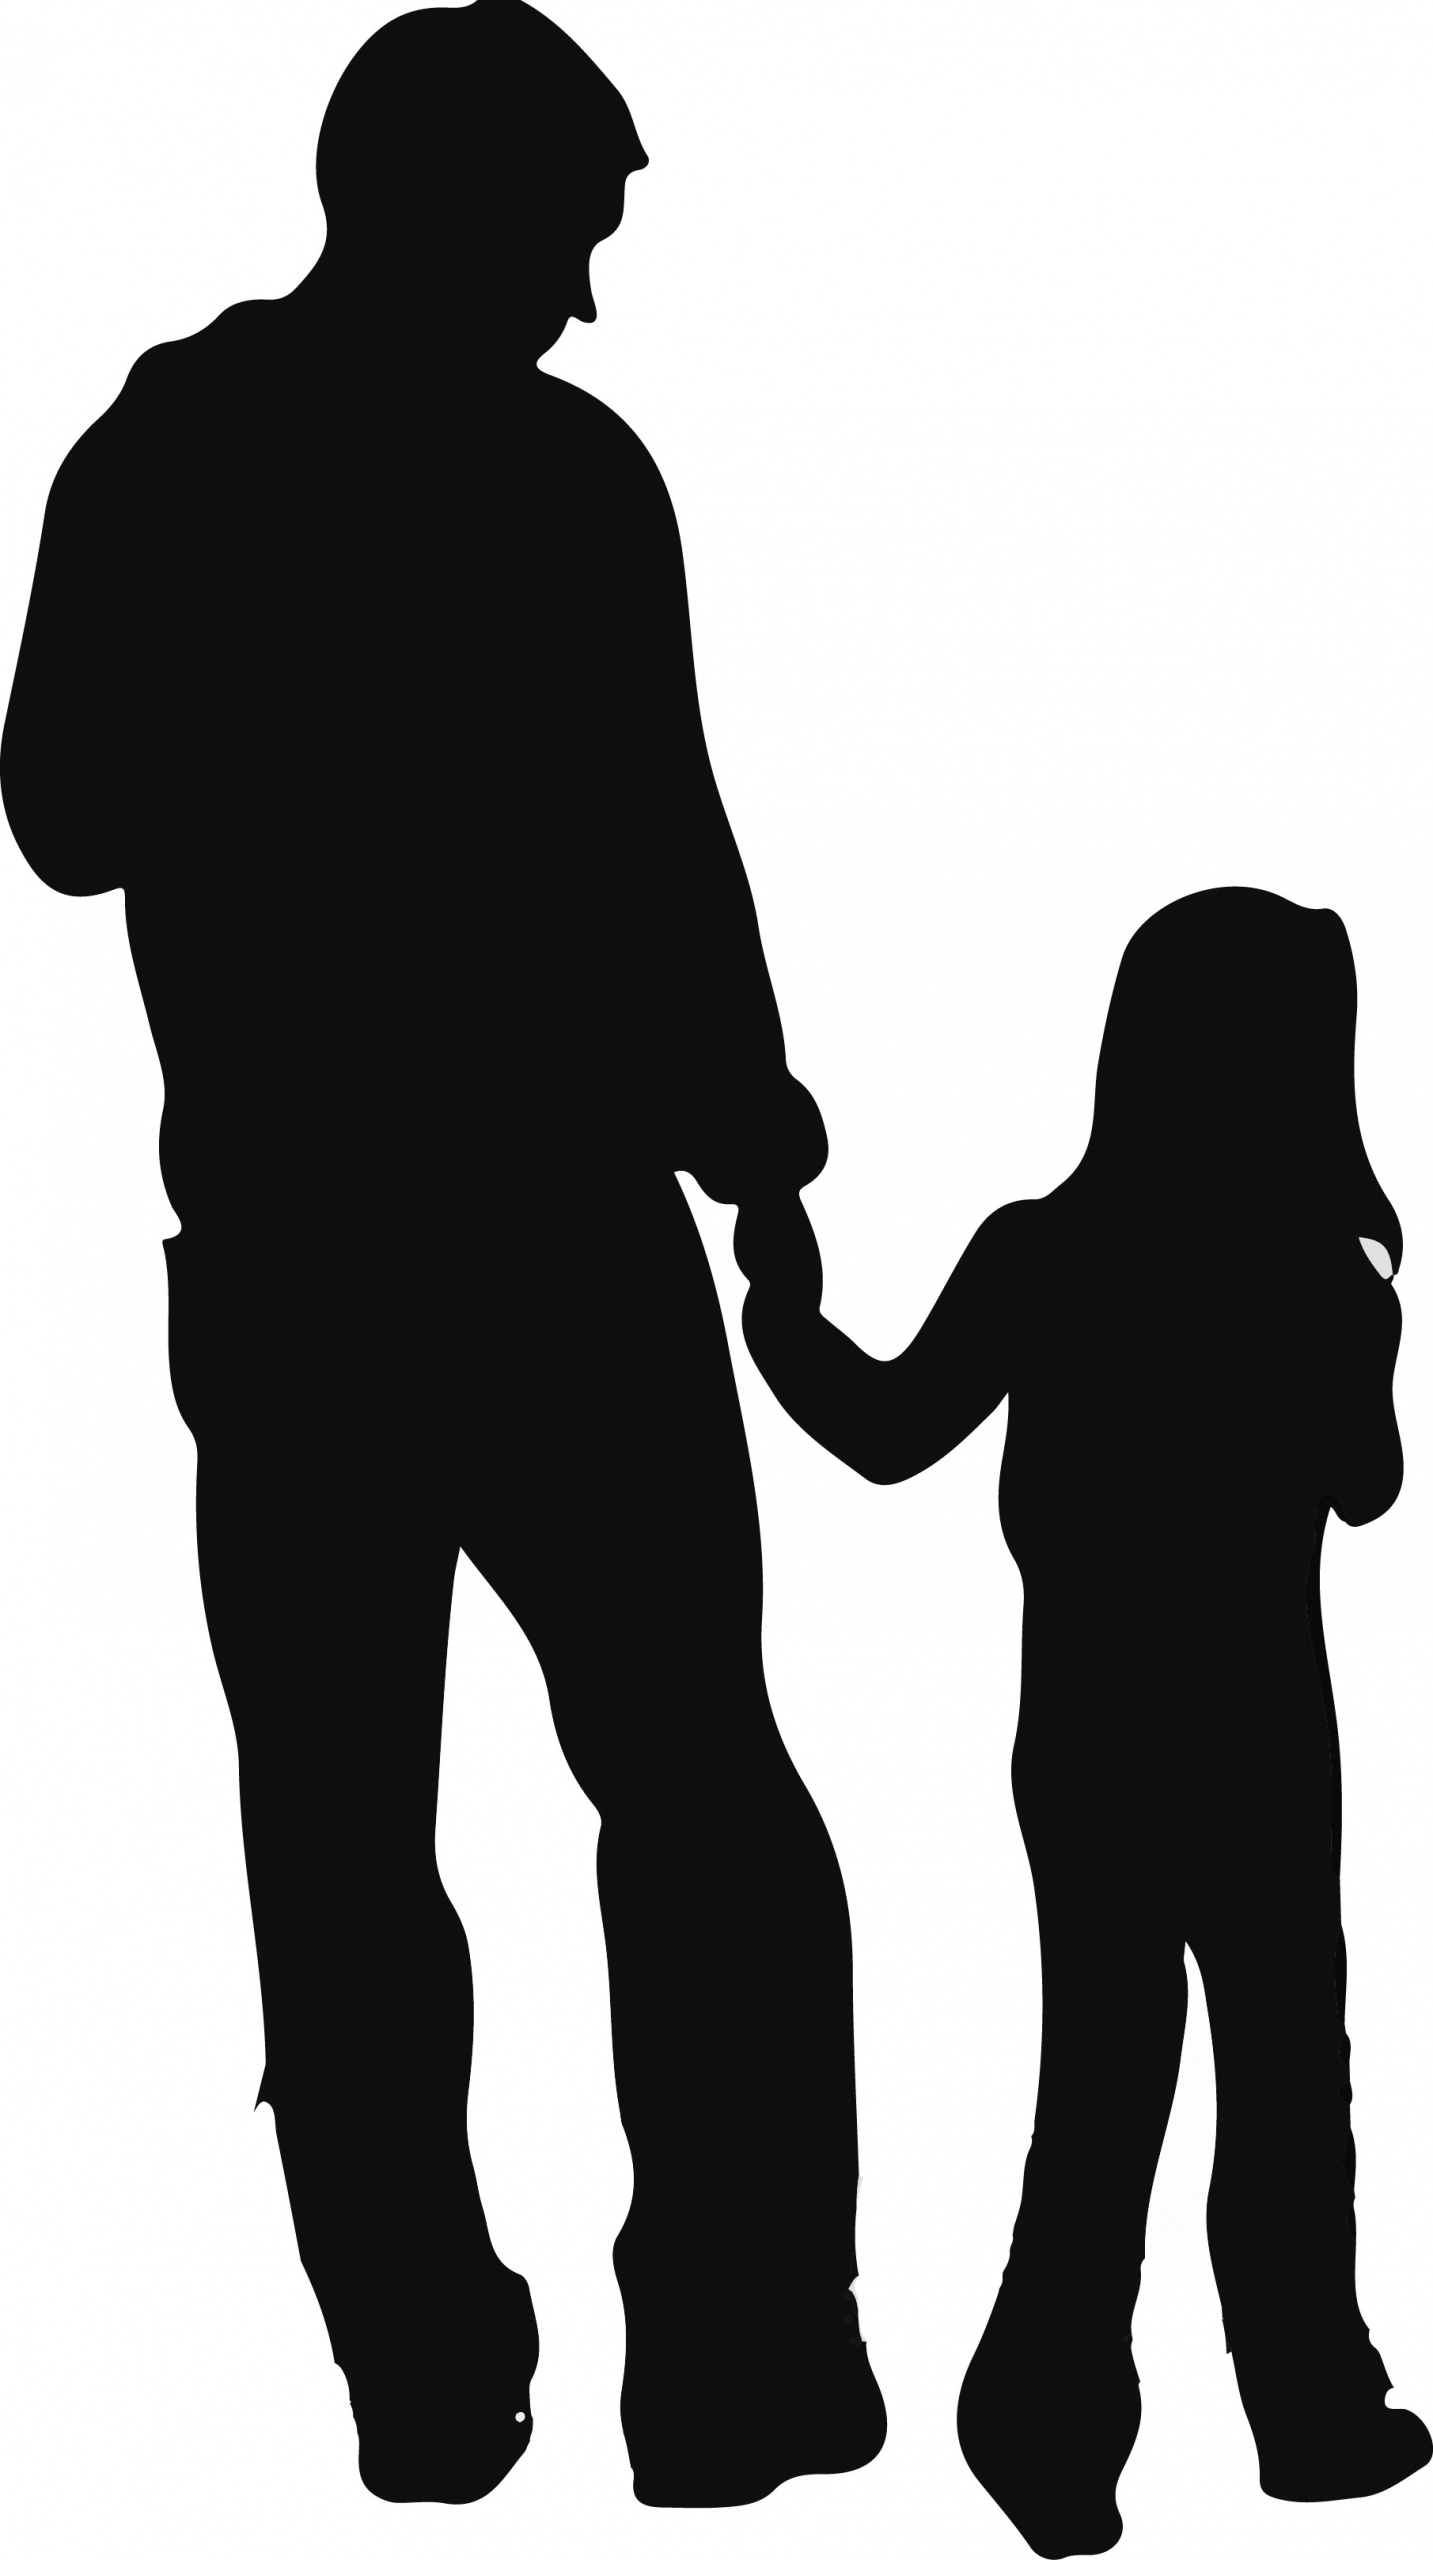 44bbbb5f5905292a83d48253482c9da1 father daughter dance silhouette at getdrawingscom free for 1811 3236 png